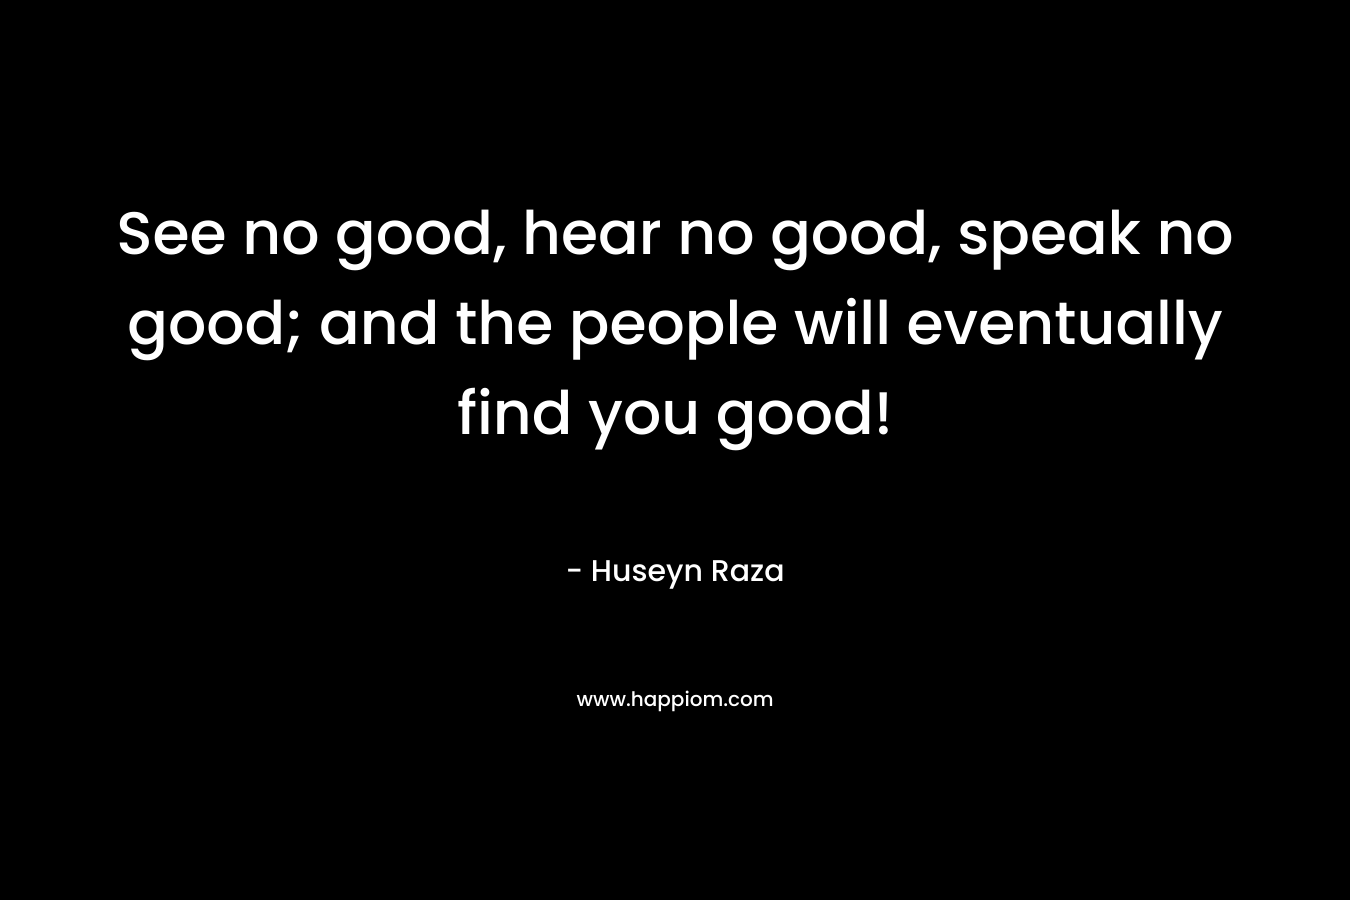 See no good, hear no good, speak no good; and the people will eventually find you good!